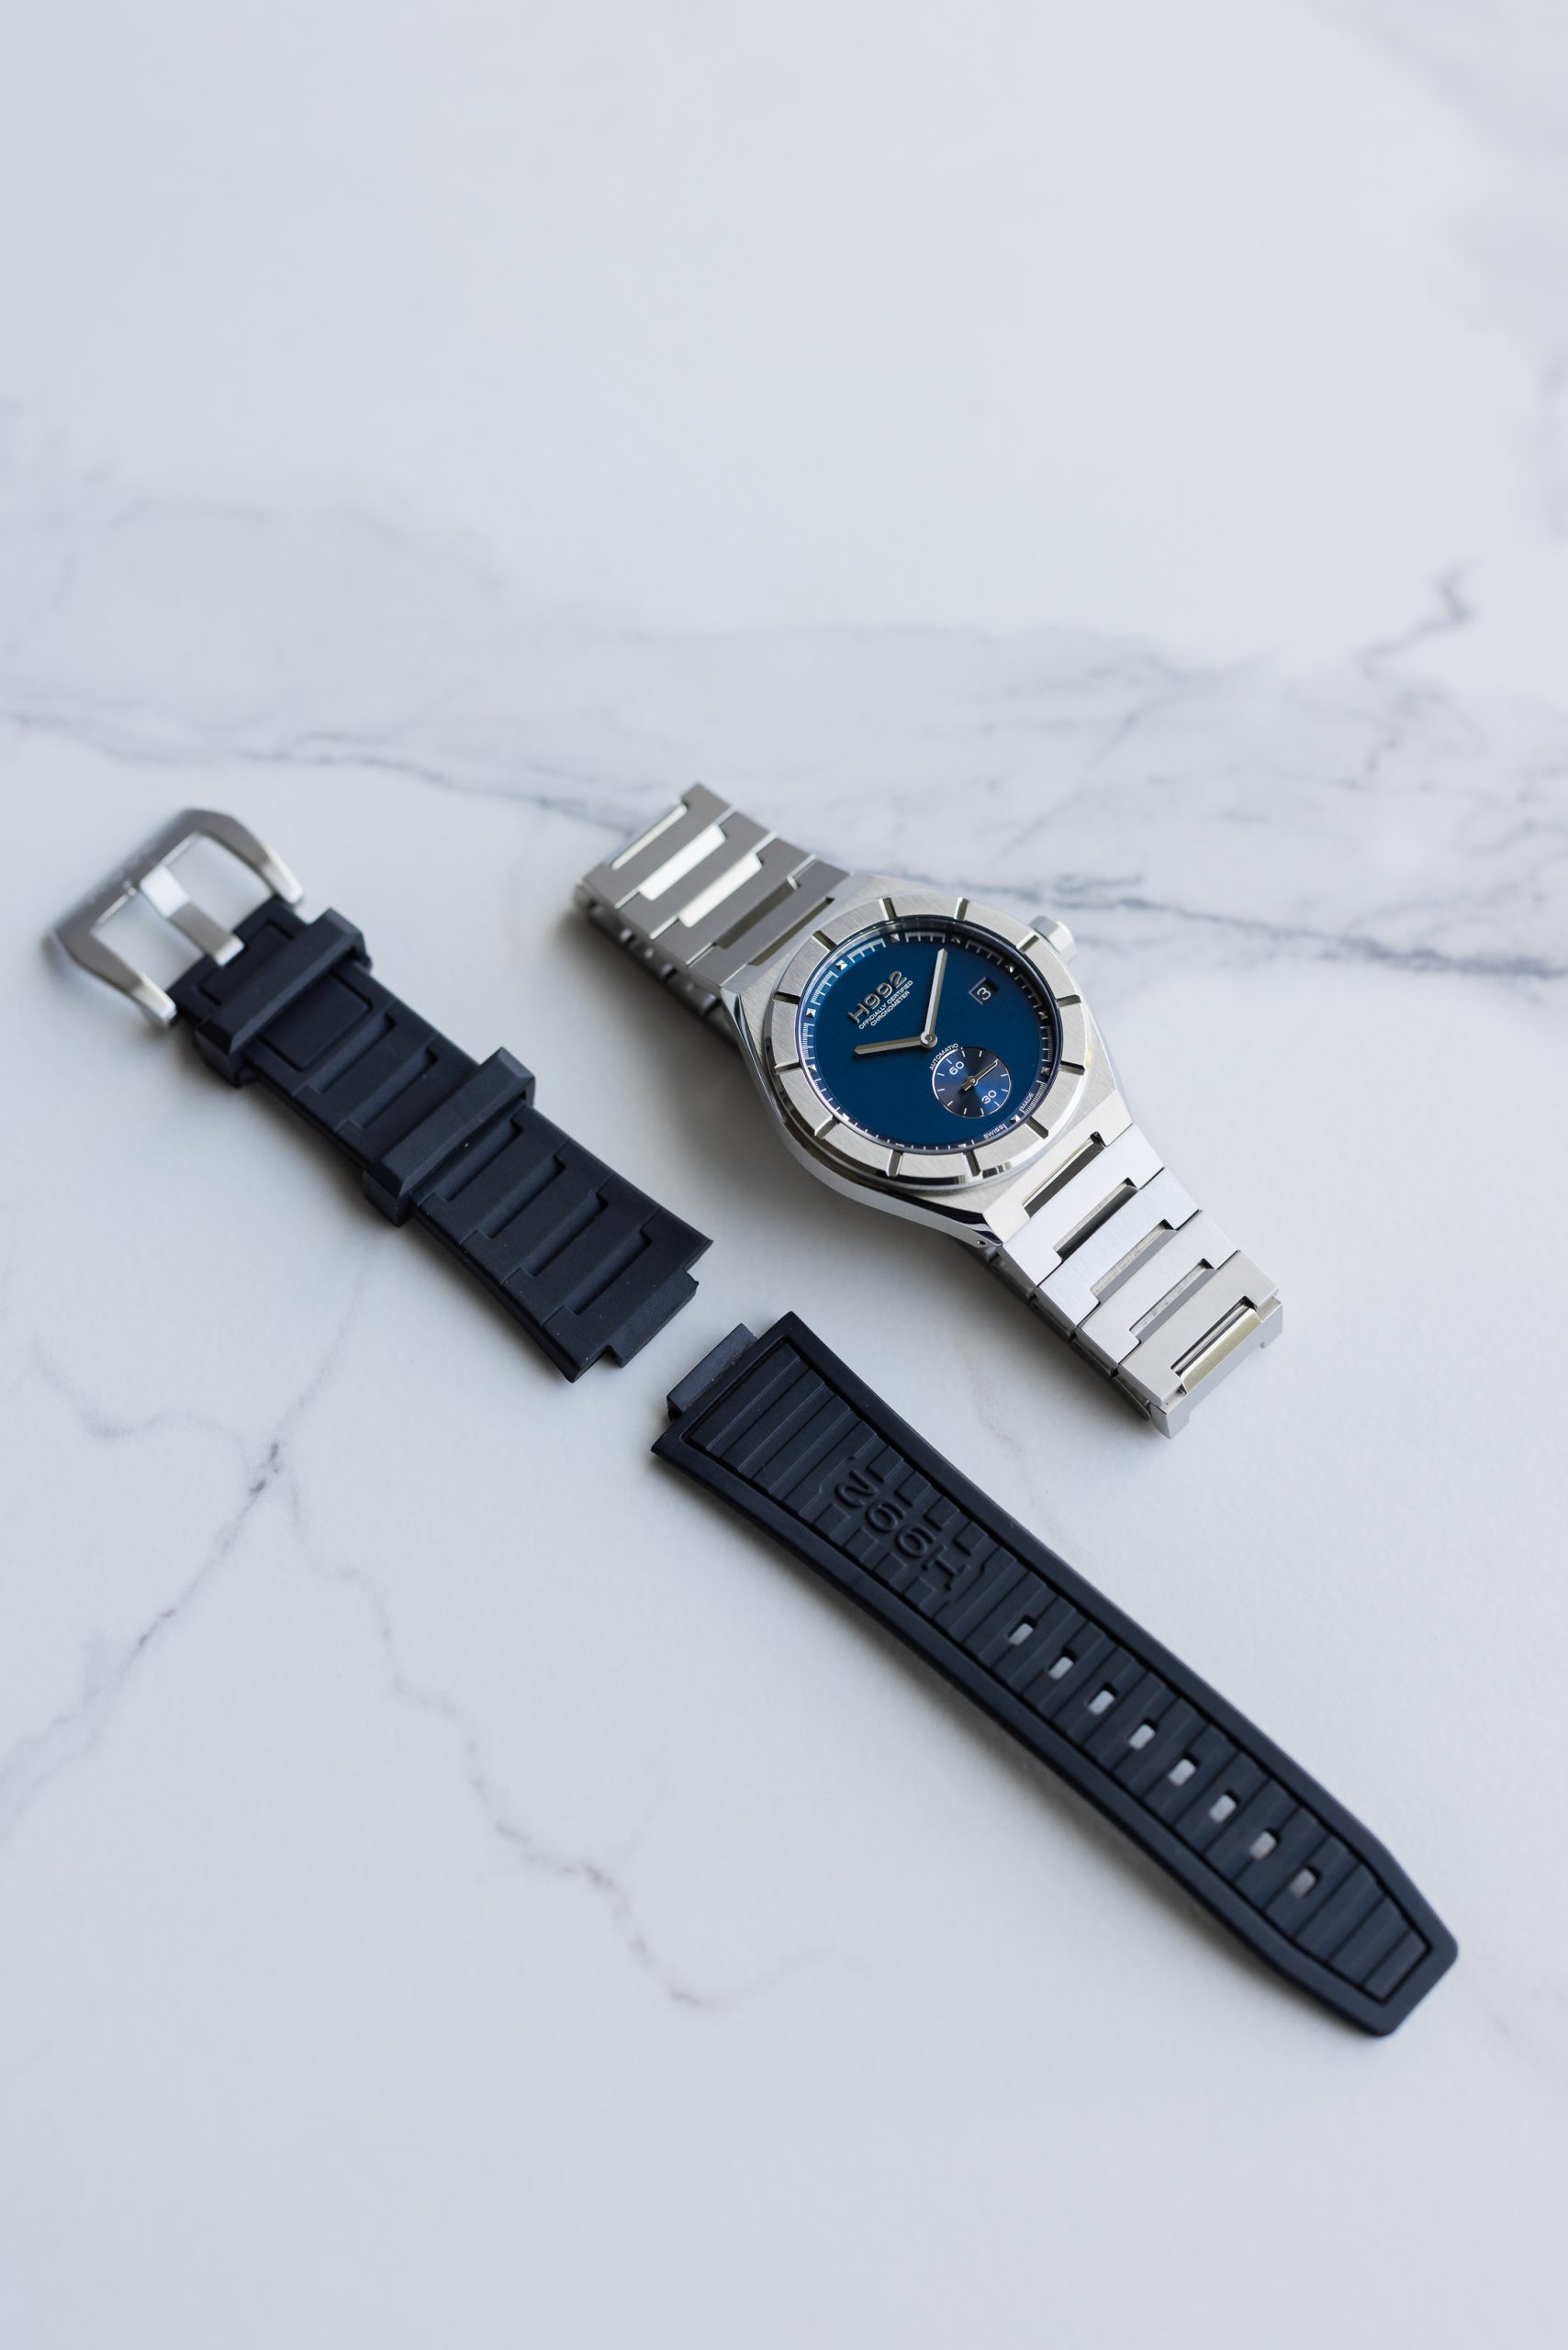 An exciting new watch from a brand new Swiss brand» — H992